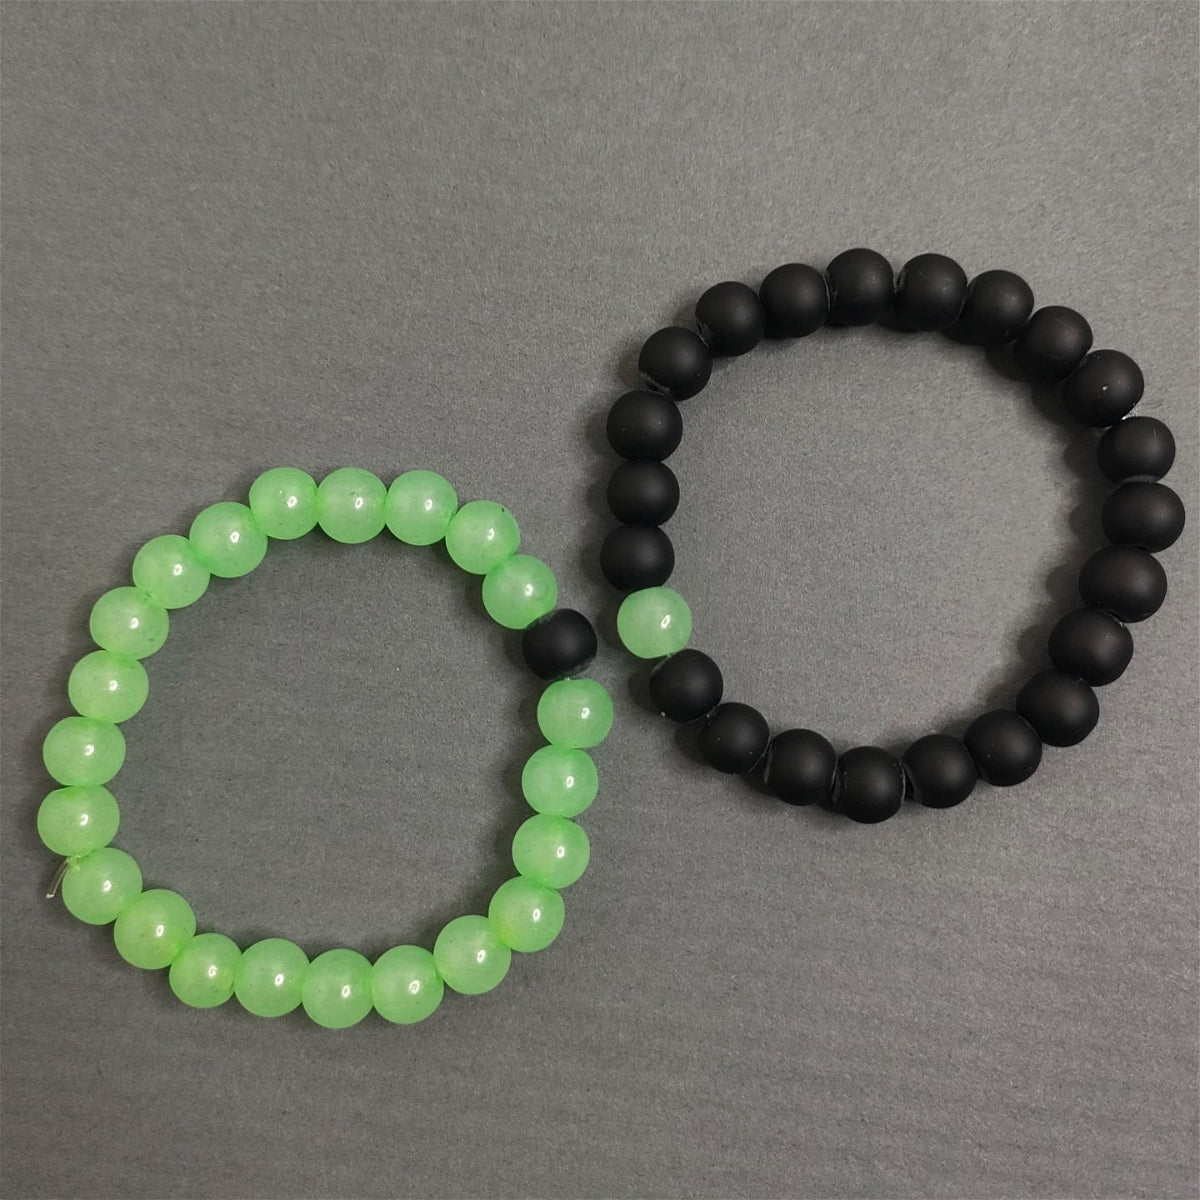 Shop by The Bro Code Black & Green Multi Beads with Stretchy Elastic  Adjustable Set of 2 Bracelets for Men